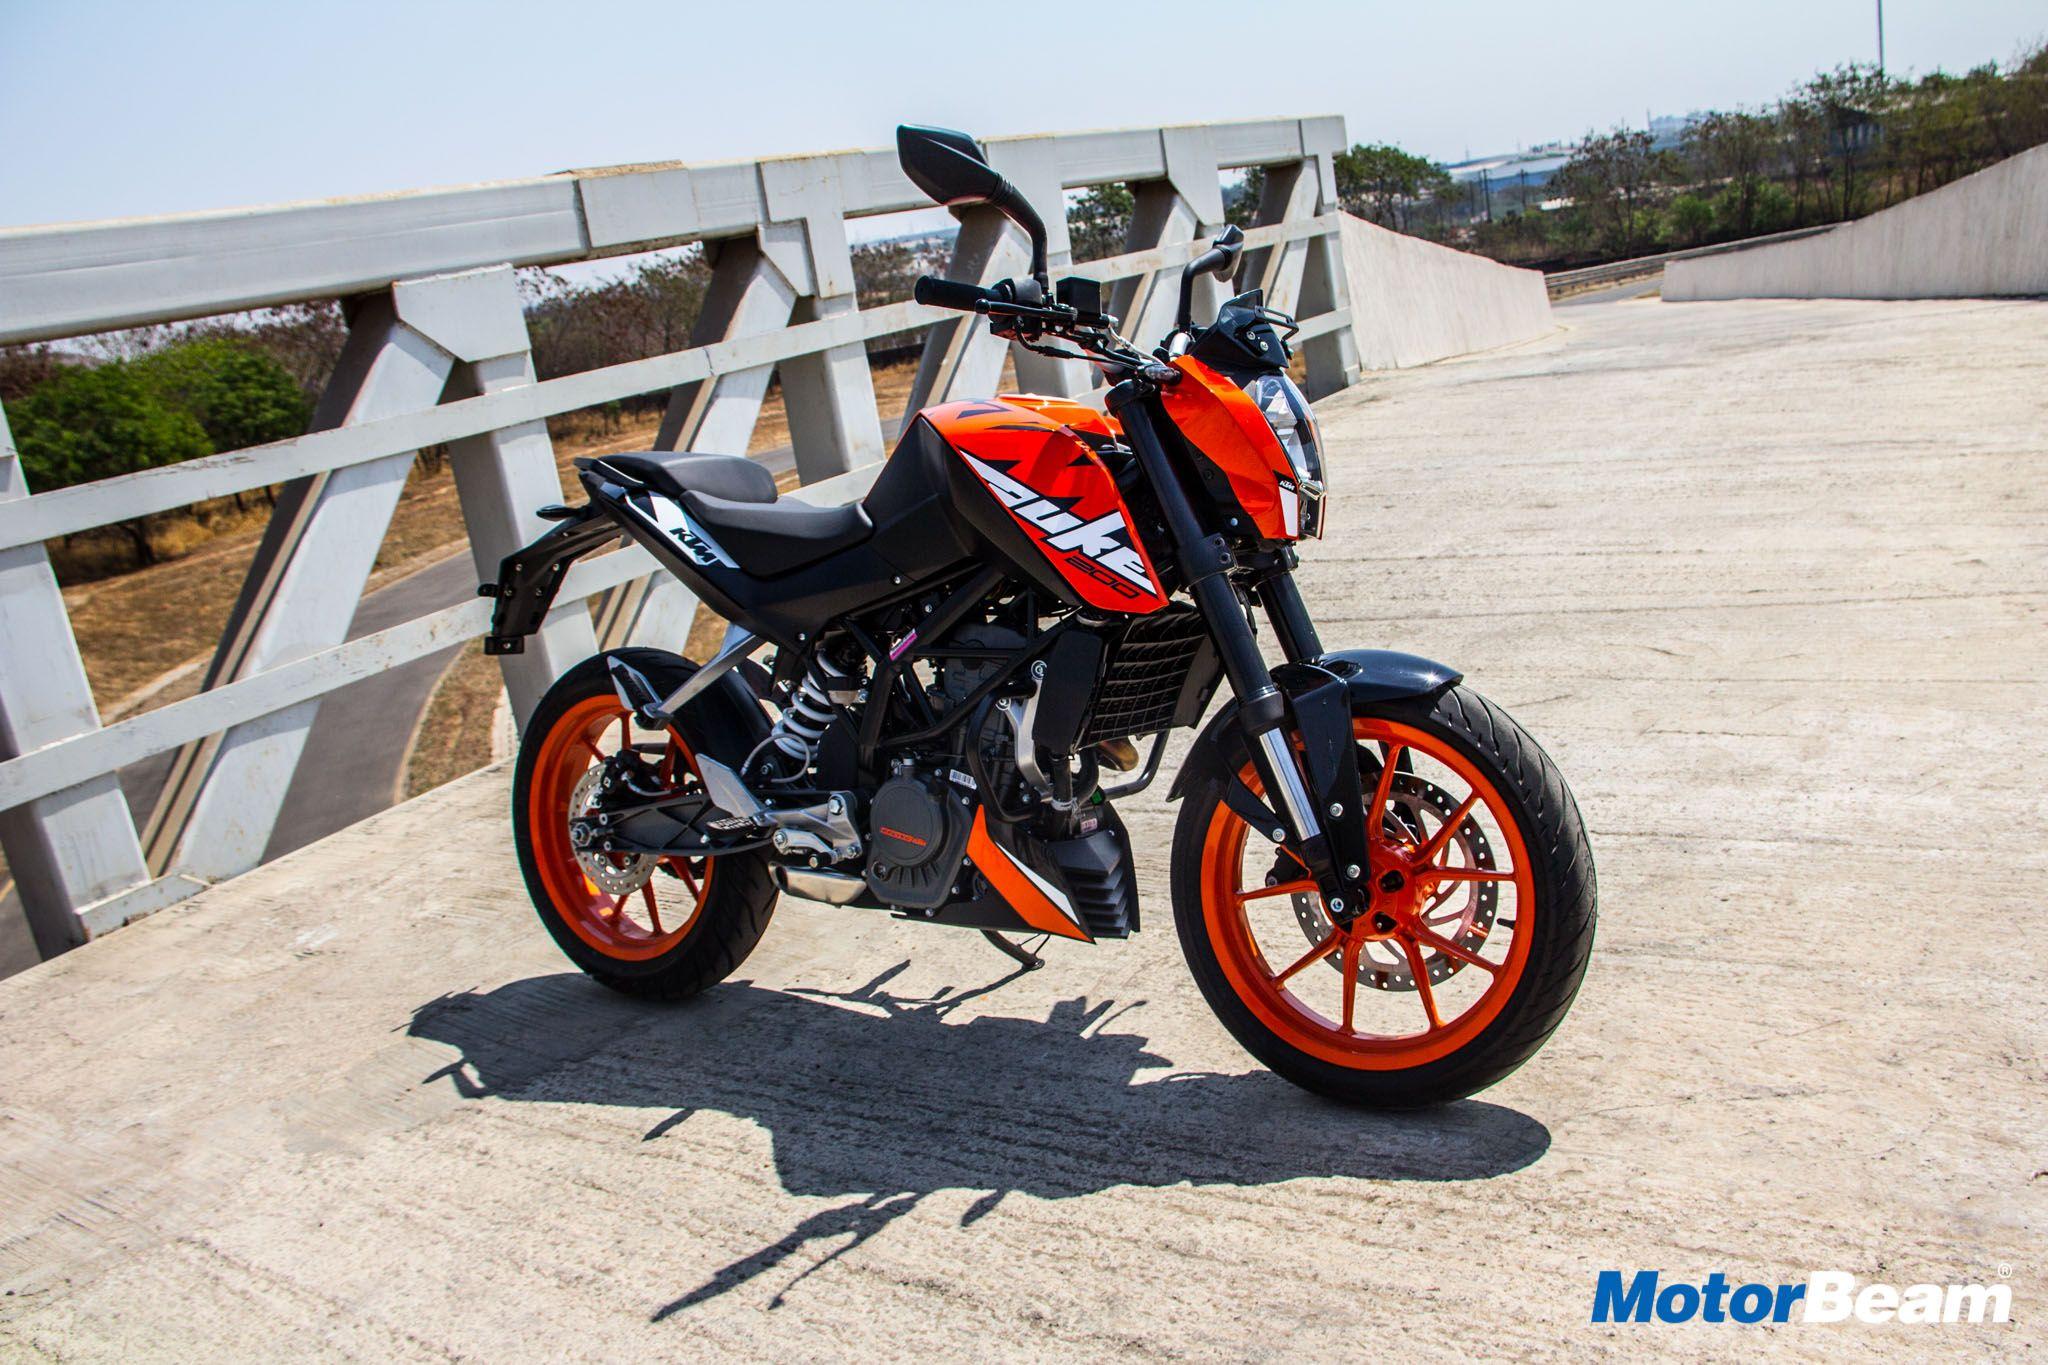 KTM Duke 200 Price, Review, Mileage, Features, Specifications